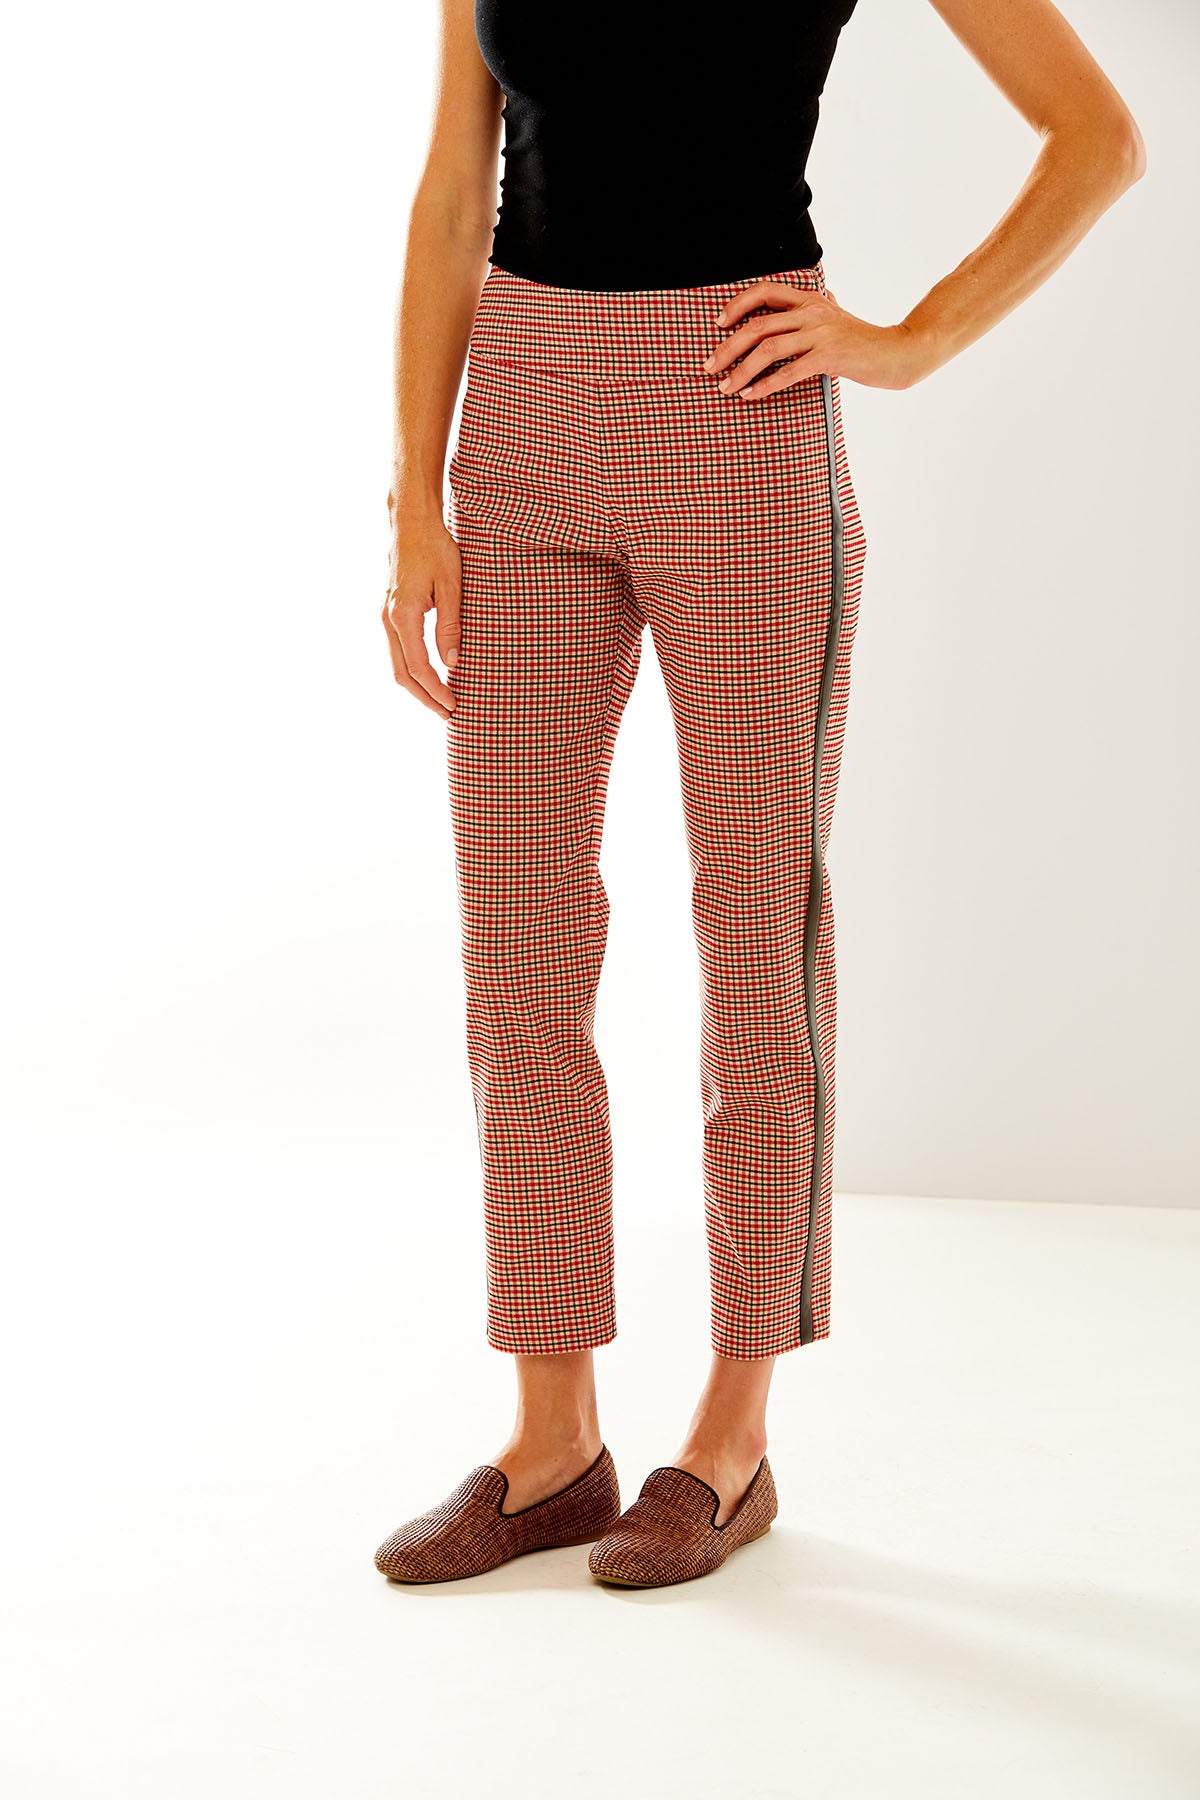 Woman in plaid pant